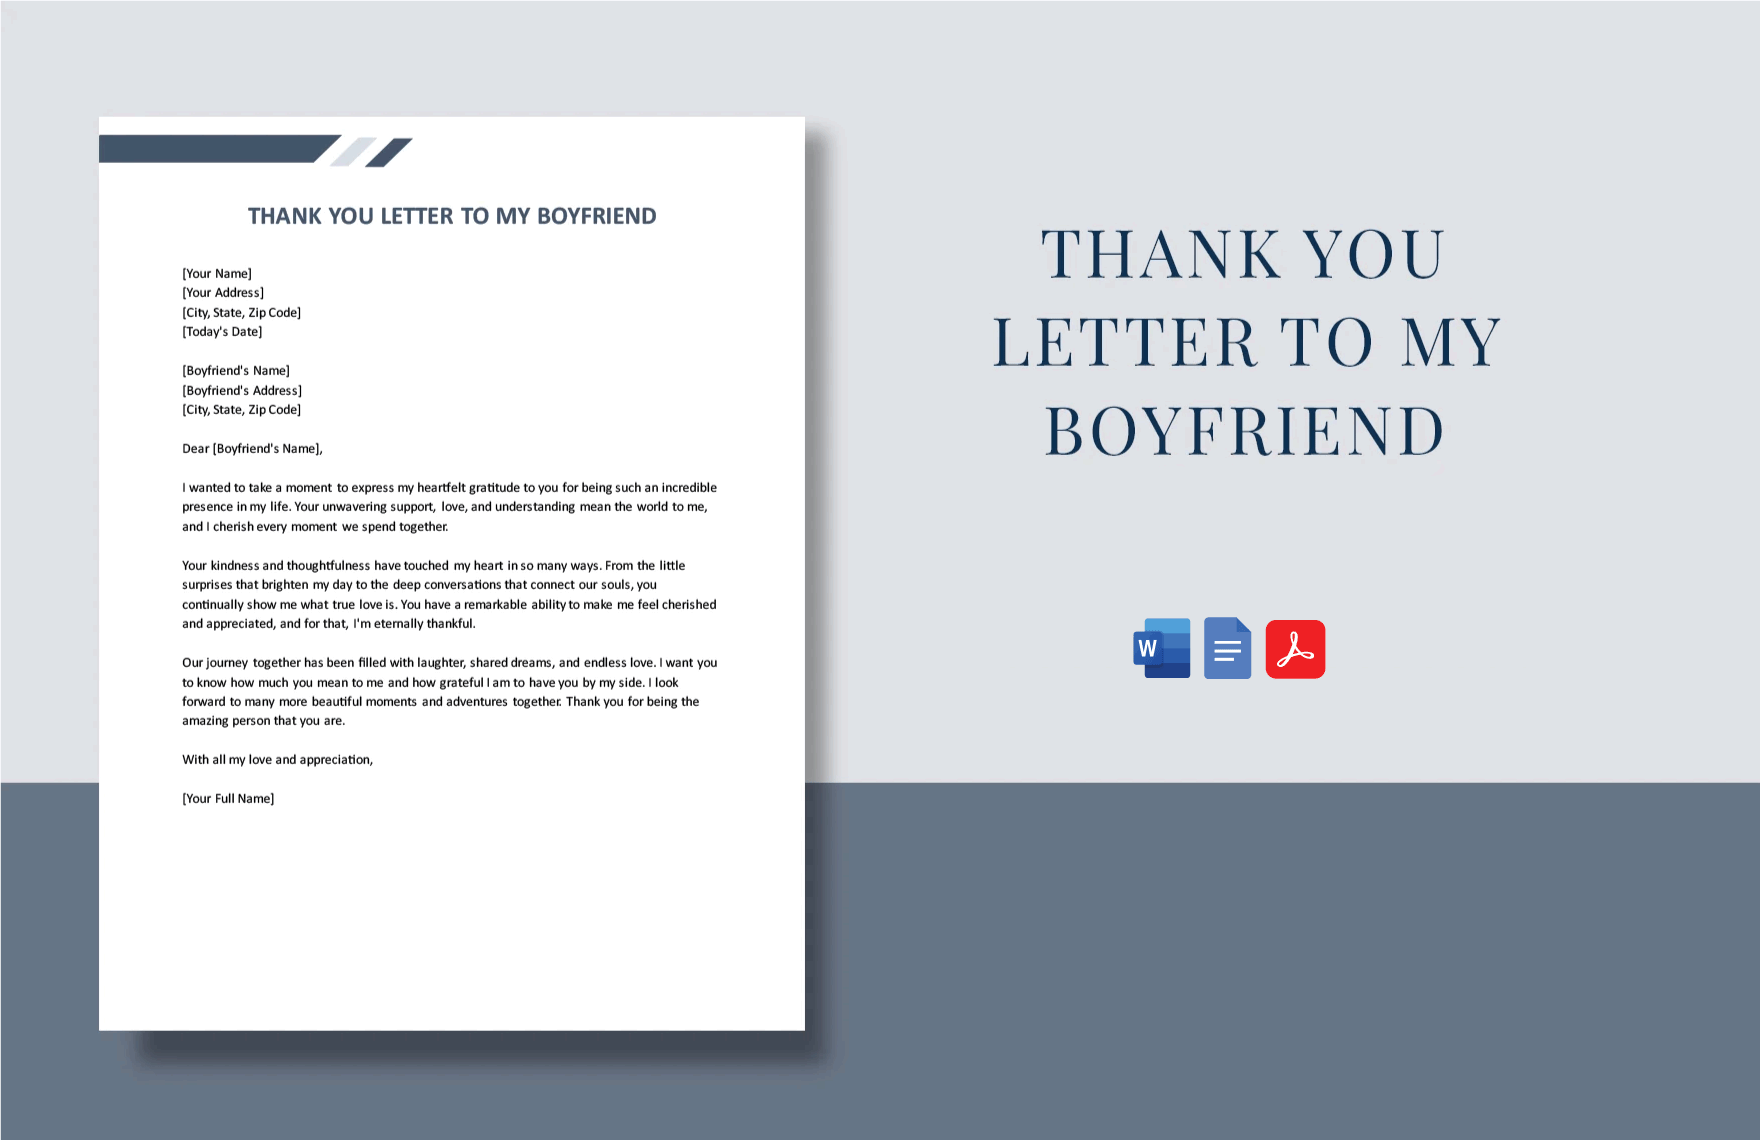 Thank-You Letter To My Boyfriend